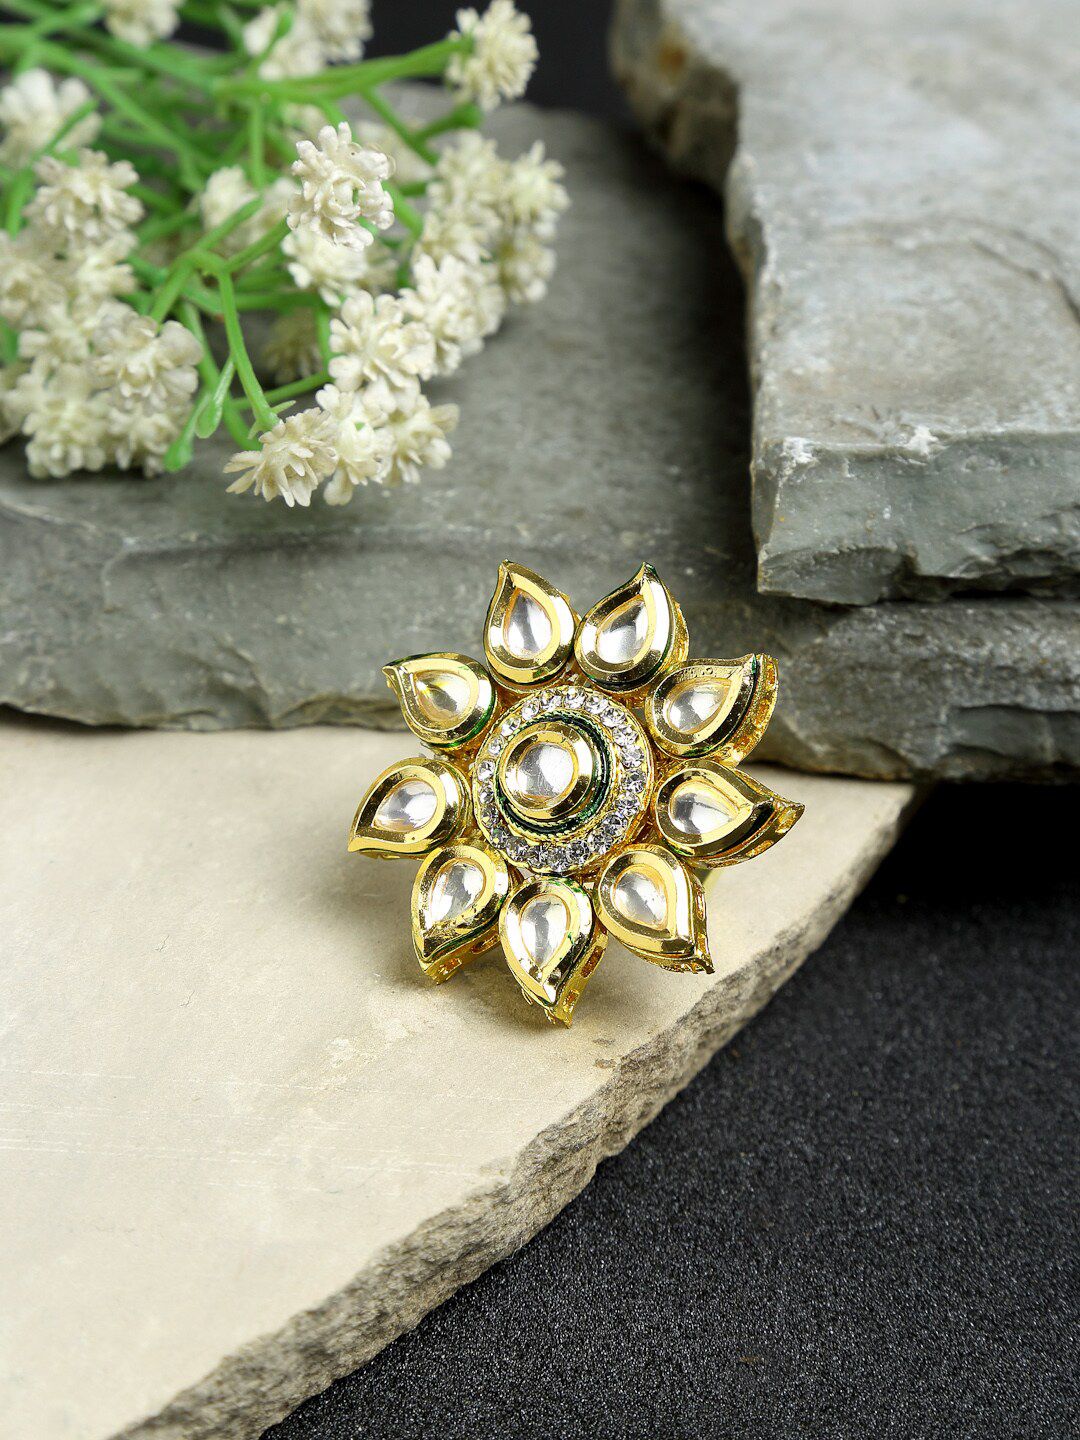 Ruby Raang Gold-Toned & White Kundan Studded Flower Handcrafted Adjustable Finger Ring Price in India